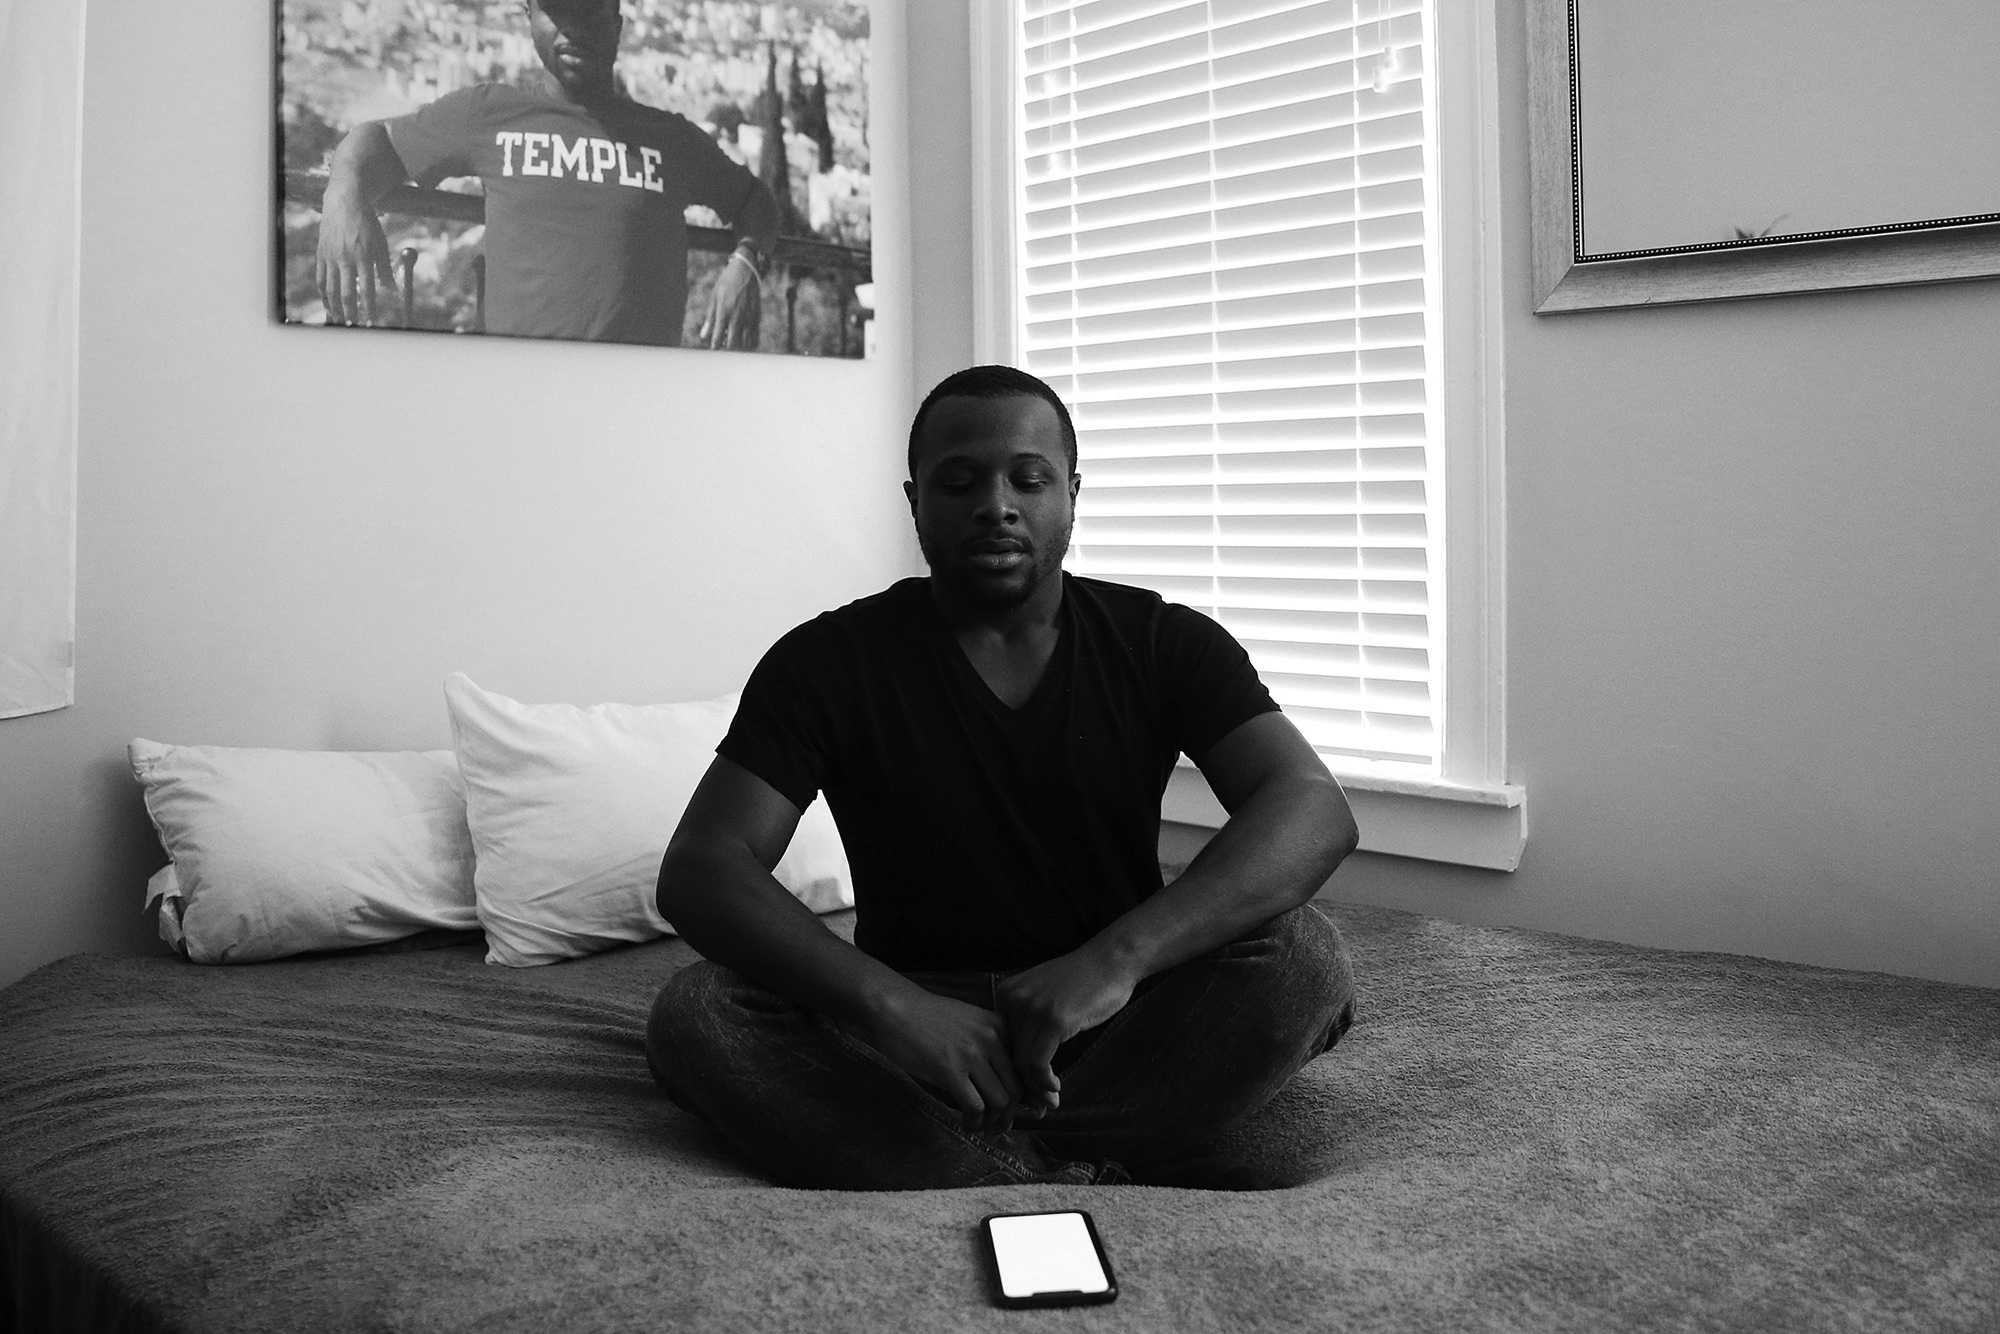 Ewan Johnson at home in West Philadelphia on October 8, 2019. Johnson uses a mindfulness app called Tide. (TimTai/The Philadelphia Inquirer/TNS)